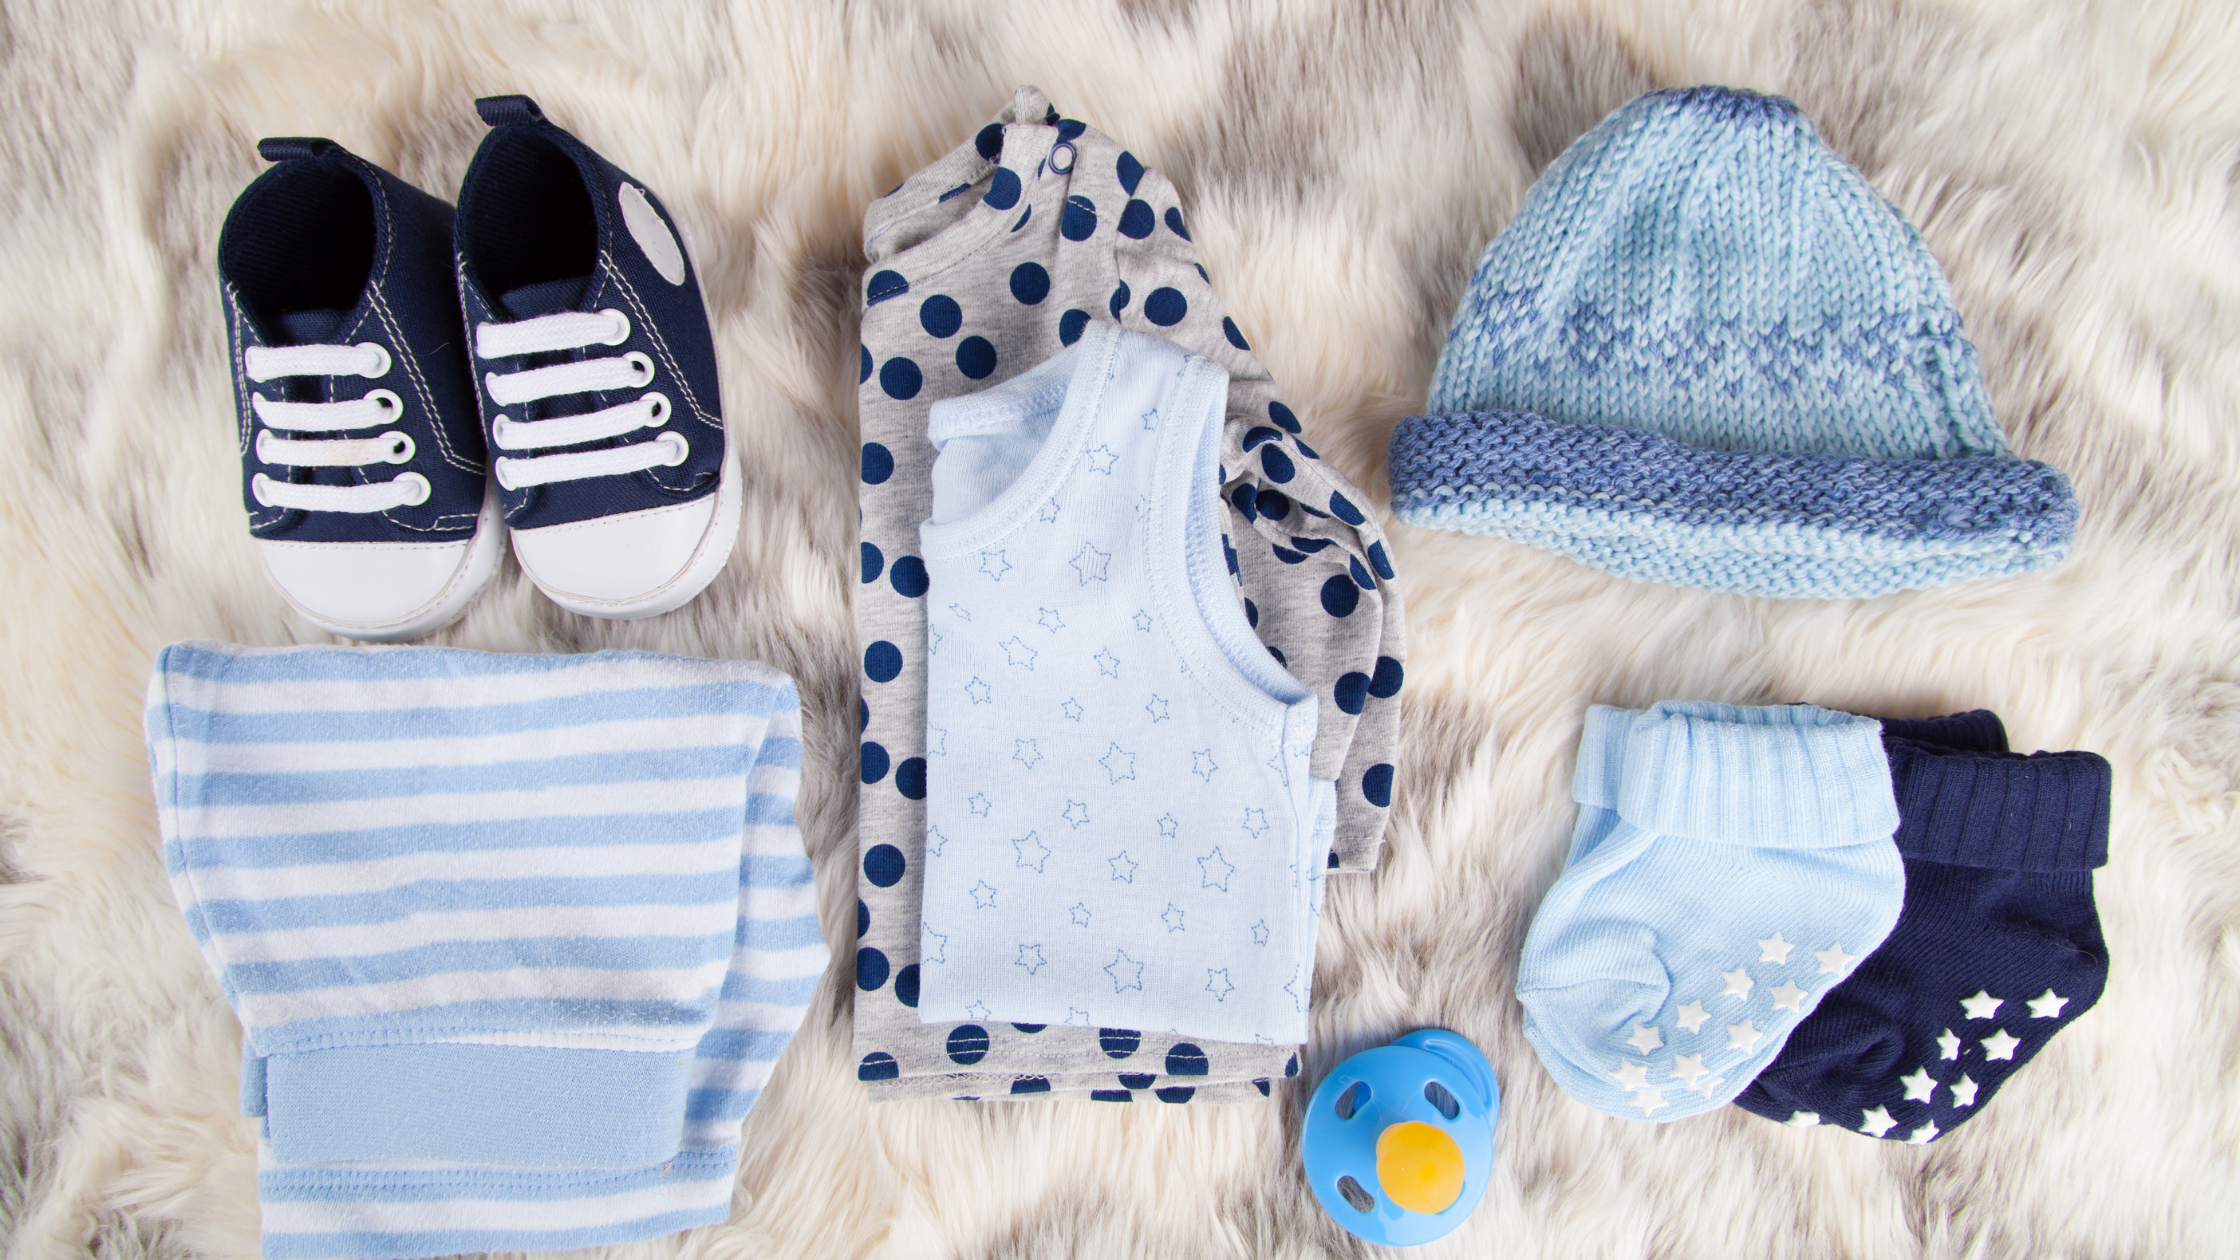 Top 10 Twin Baby Clothing Essentials and Checklist - The Way It Really Is